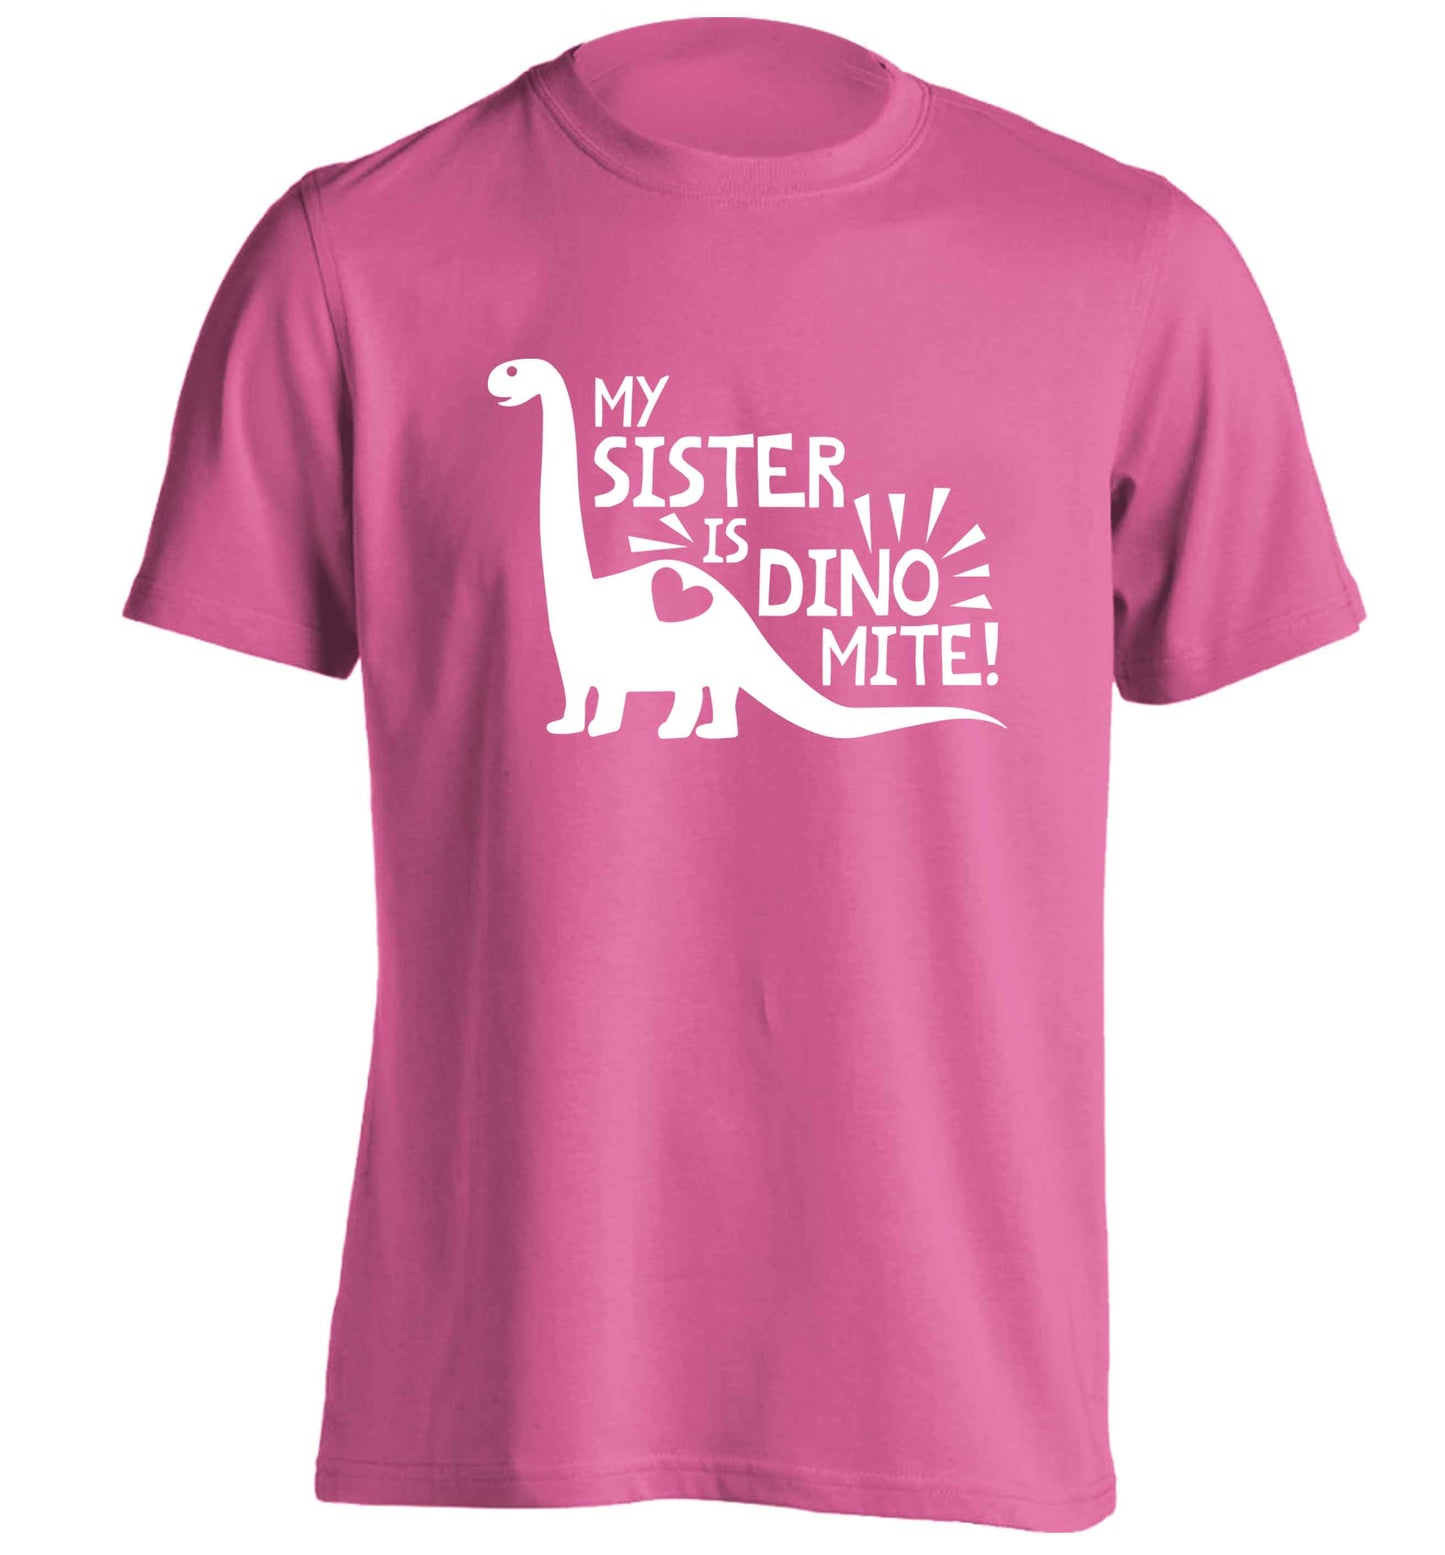 My sister is dinomite! adults unisex pink Tshirt 2XL